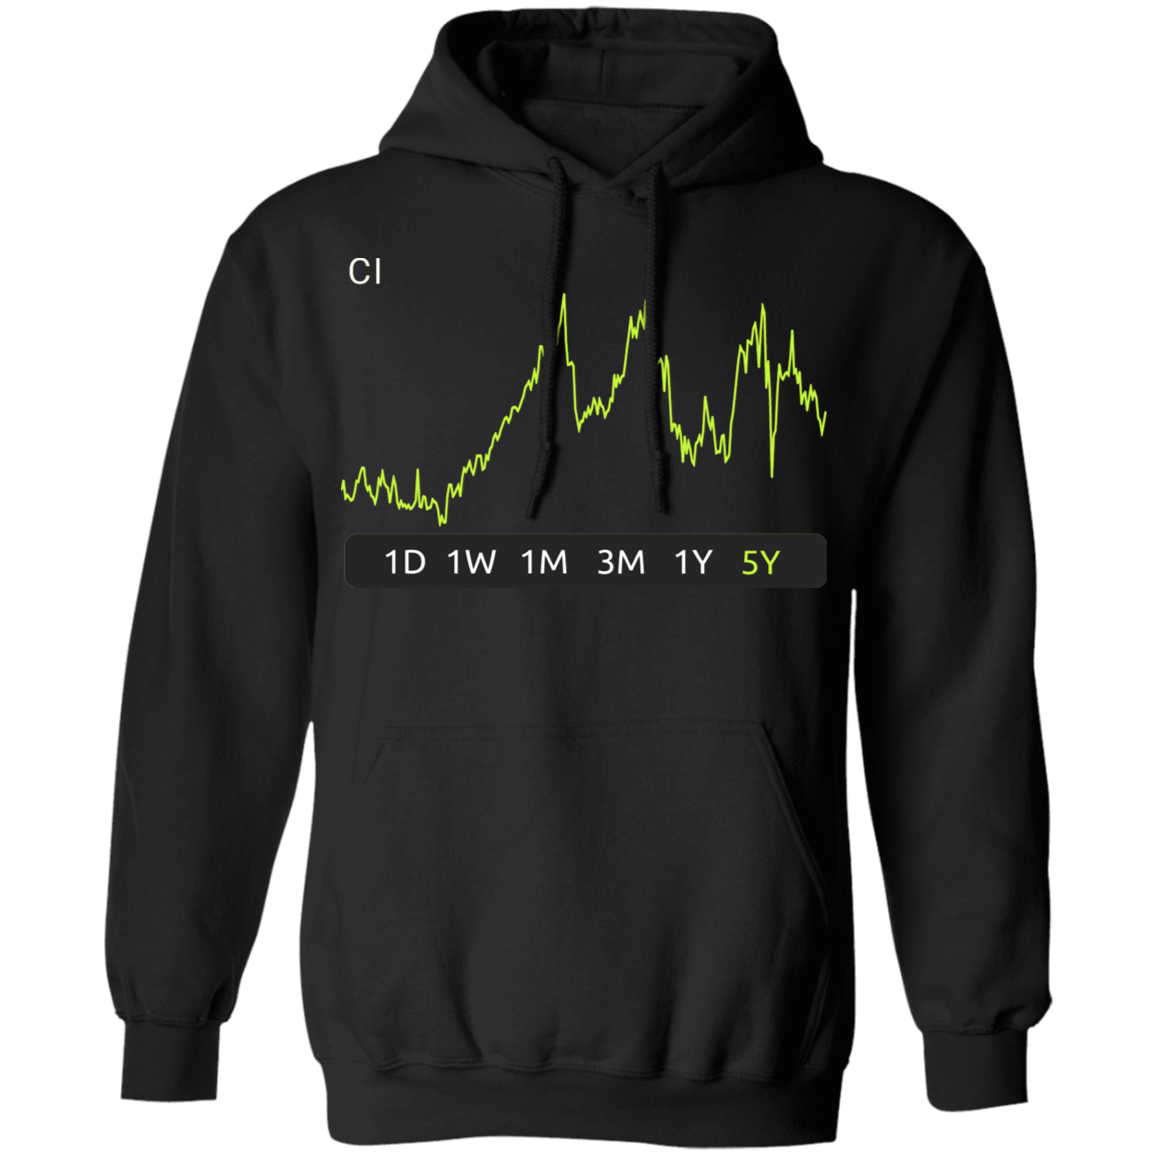 CI Stock 5y Pullover Hoodie